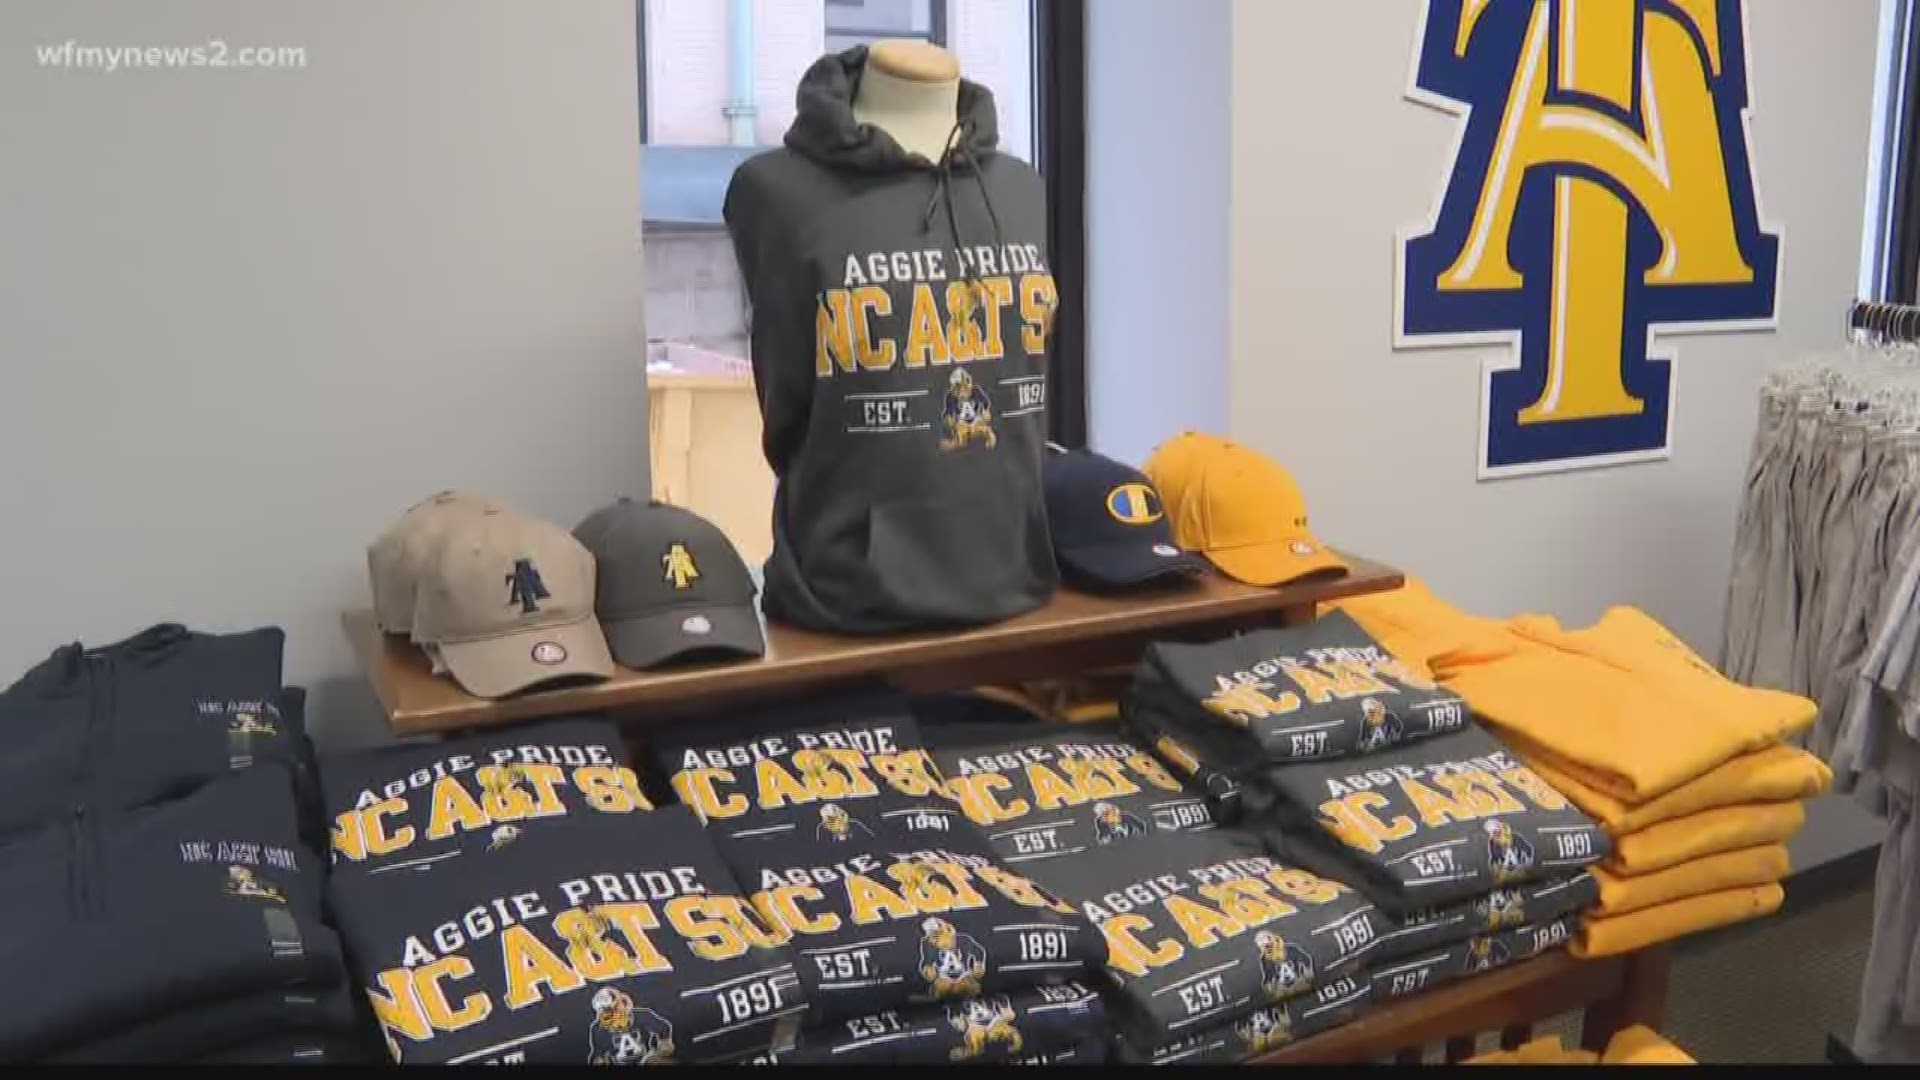 It’s homecoming for the NC A&T Aggies and a good time to open a store. You can shop through the holiday season.